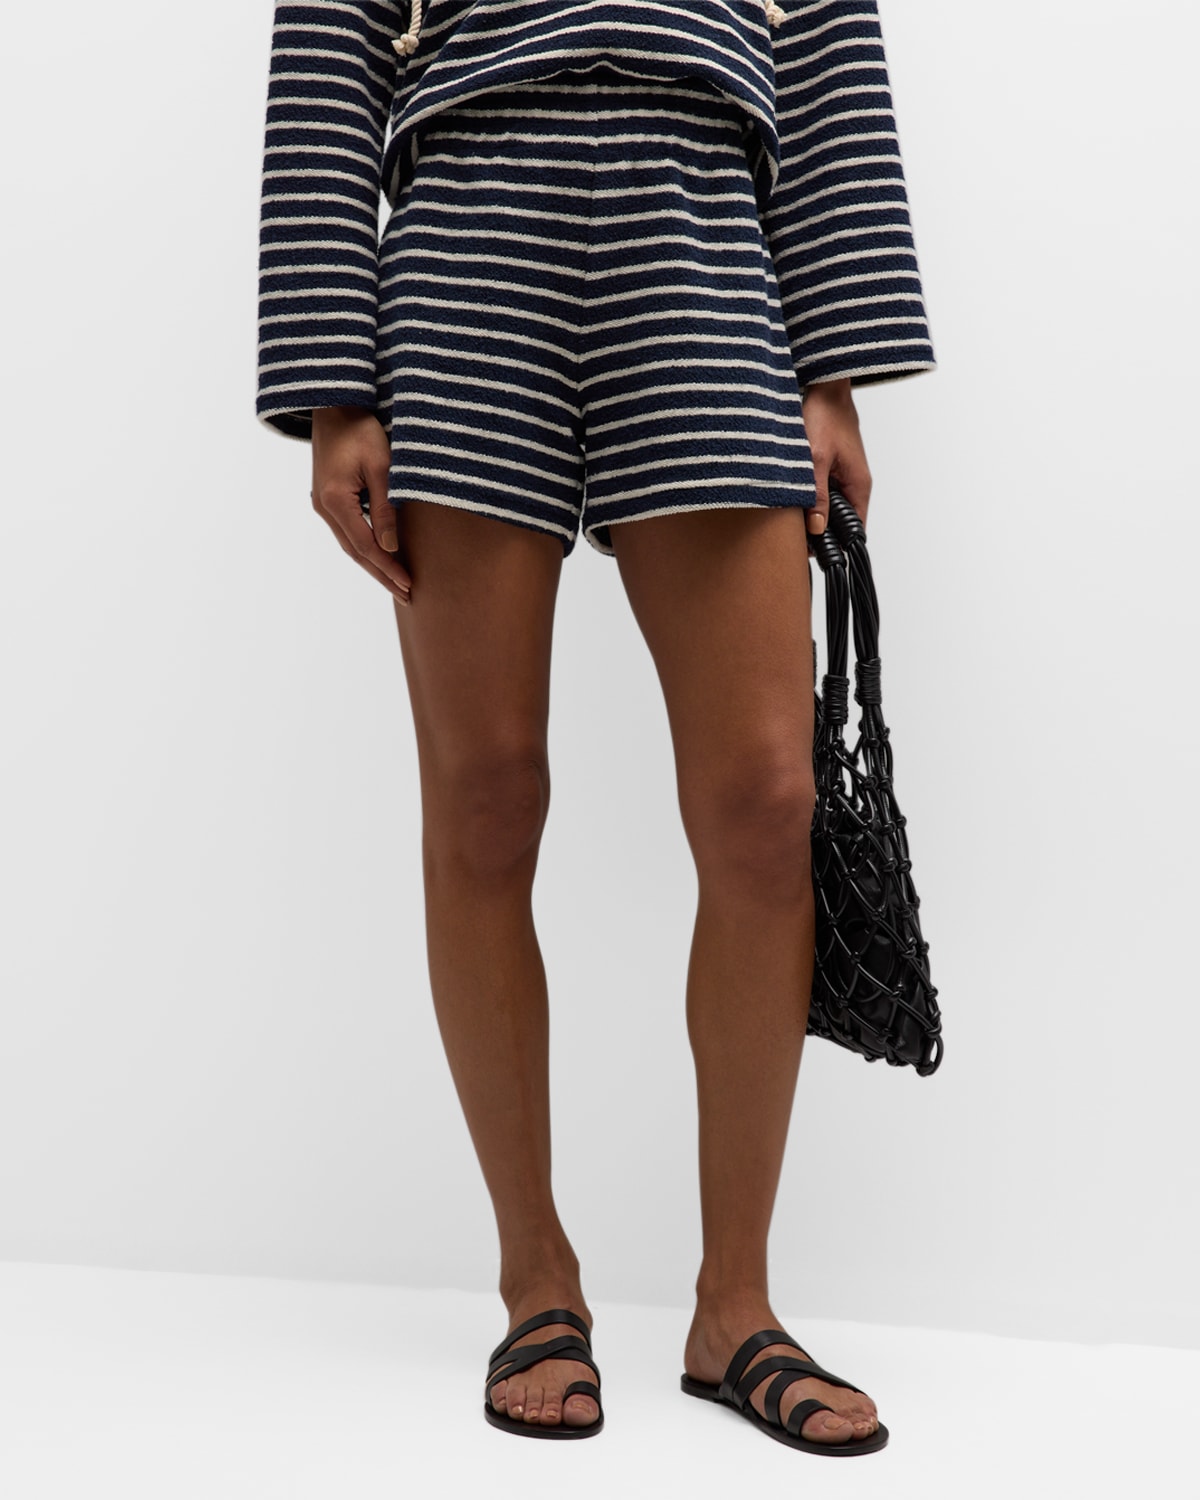 Honorine Julienne Striped Shorts In Natural Navy